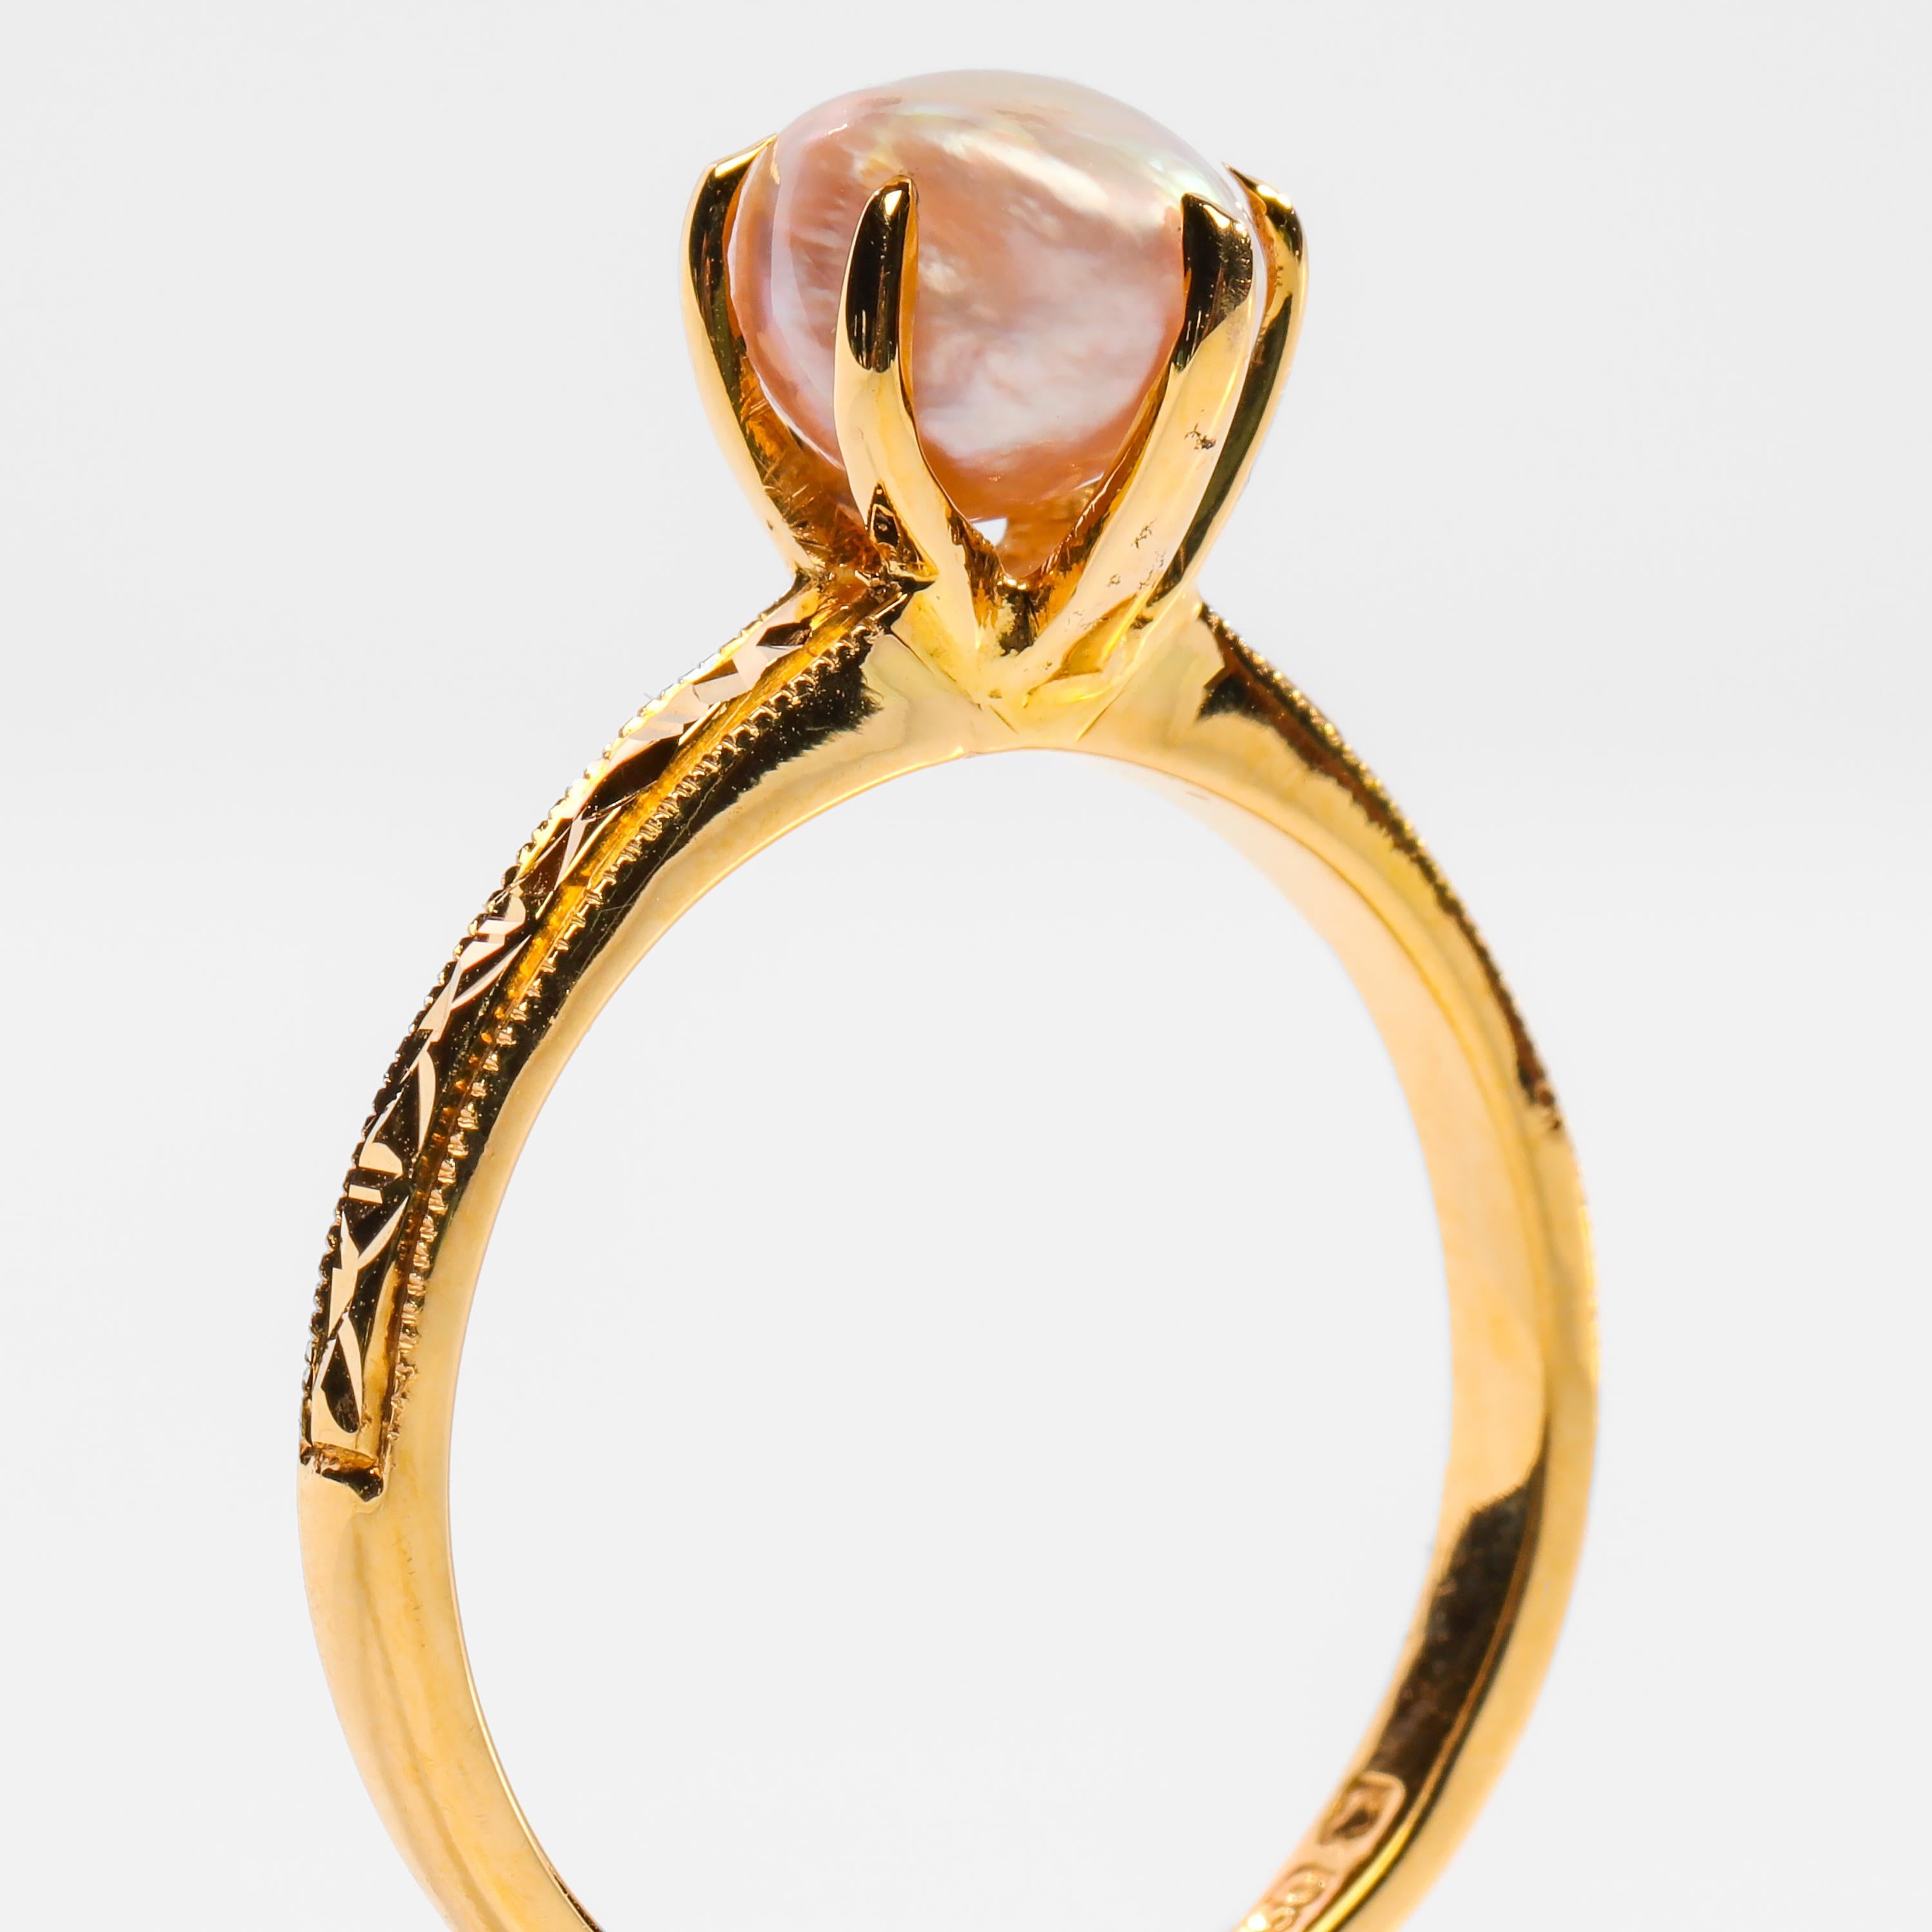 Behold the natural beauty of a fine, certified Basra pearl from the Persian Gulf securely set within six prongs in this buttery, 18K solid yellow gold Victorian style ring. The ring dates to approximately 2010 and has never been worn. But the gold